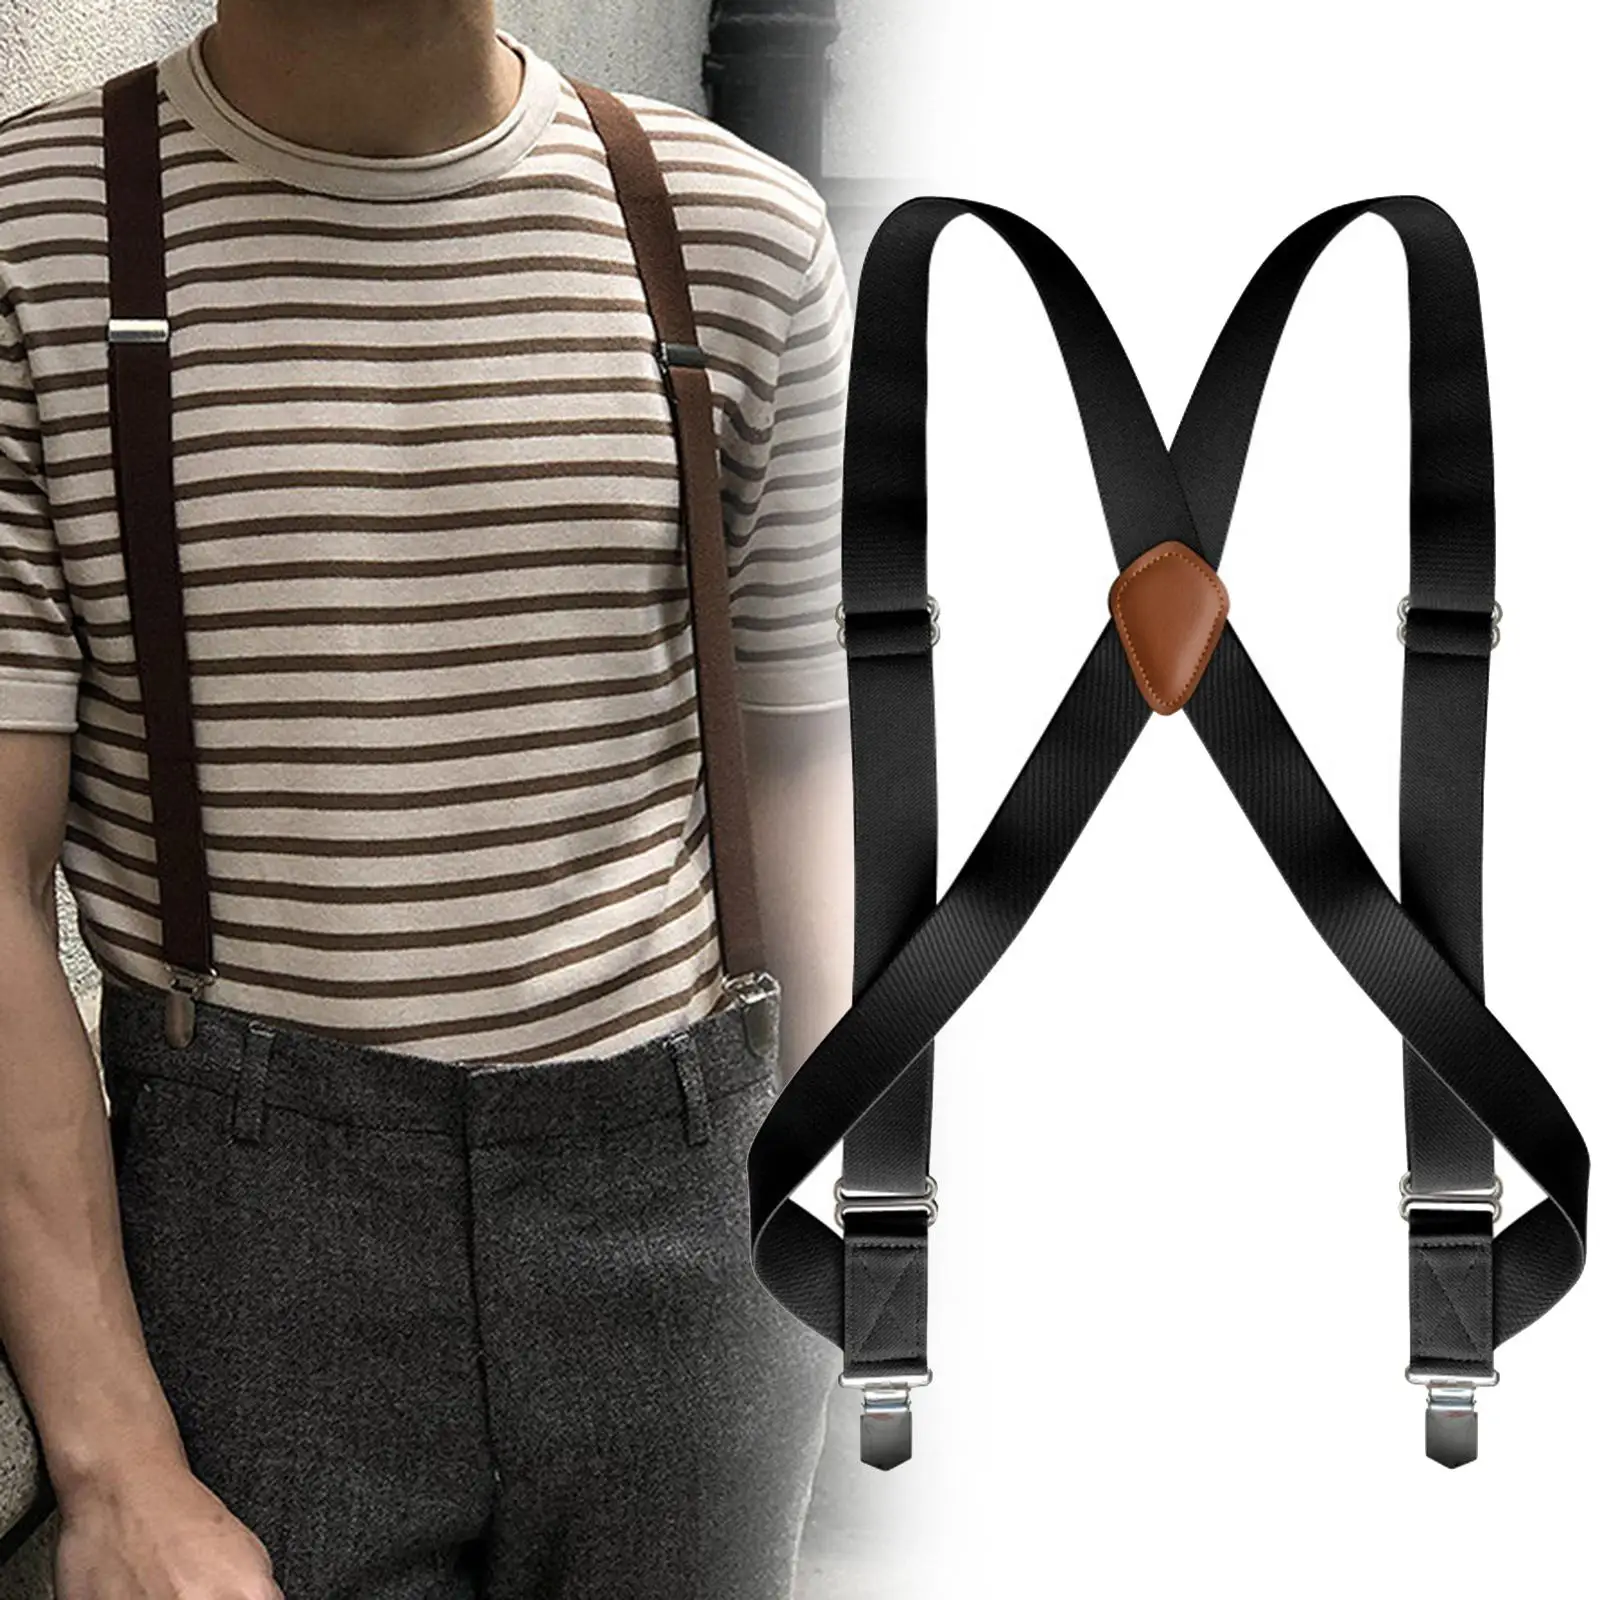 Mens Suspender with Clips Clothes Accessories Pants Holder Casual Work Suspenders for Boyfriends Wedding Trousers Friends Jeans